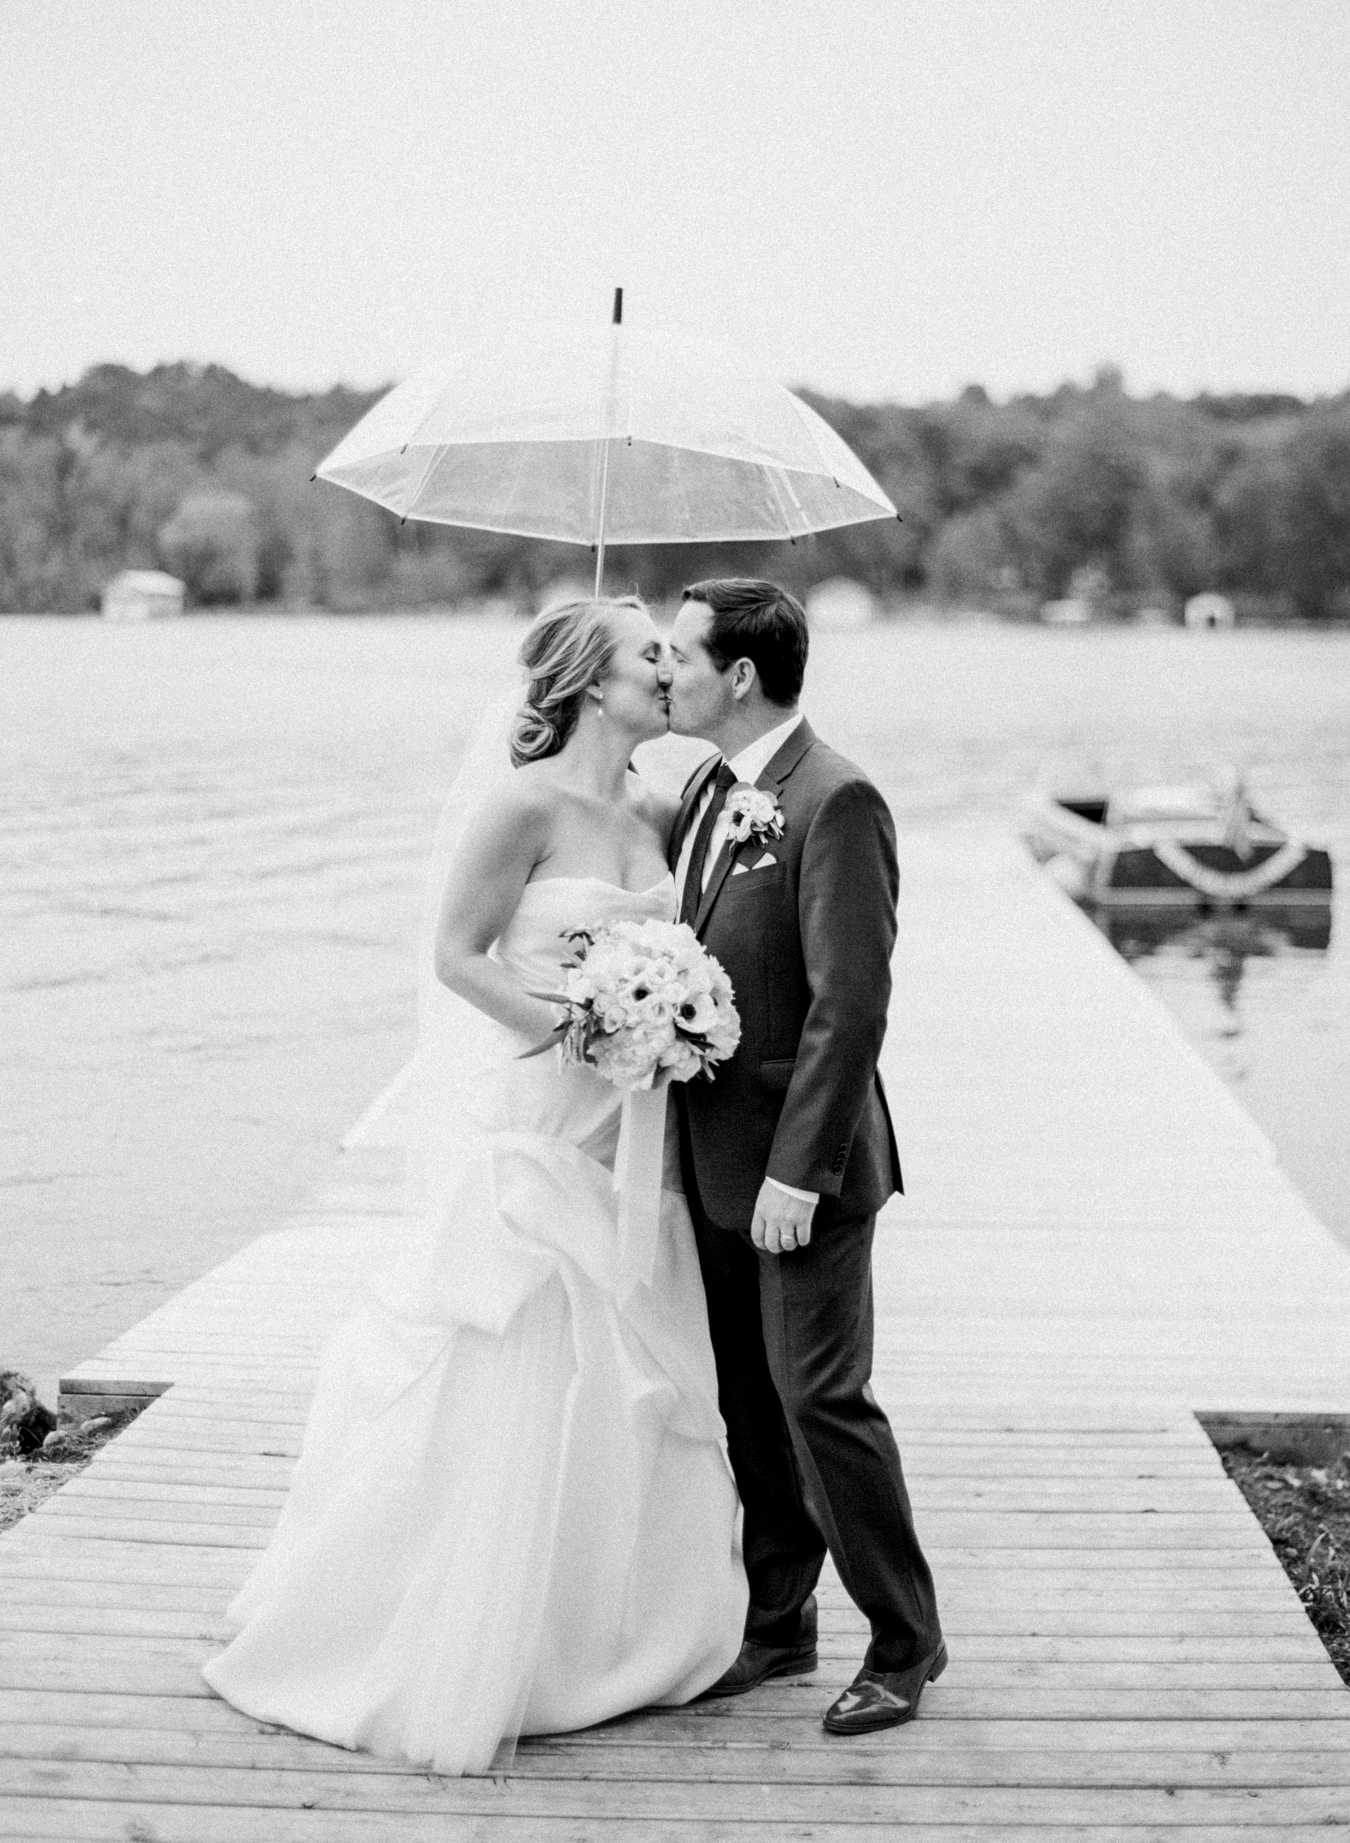 Cory Weber Photography | Sincerely Ginger Weddings | Fountain Point Resort